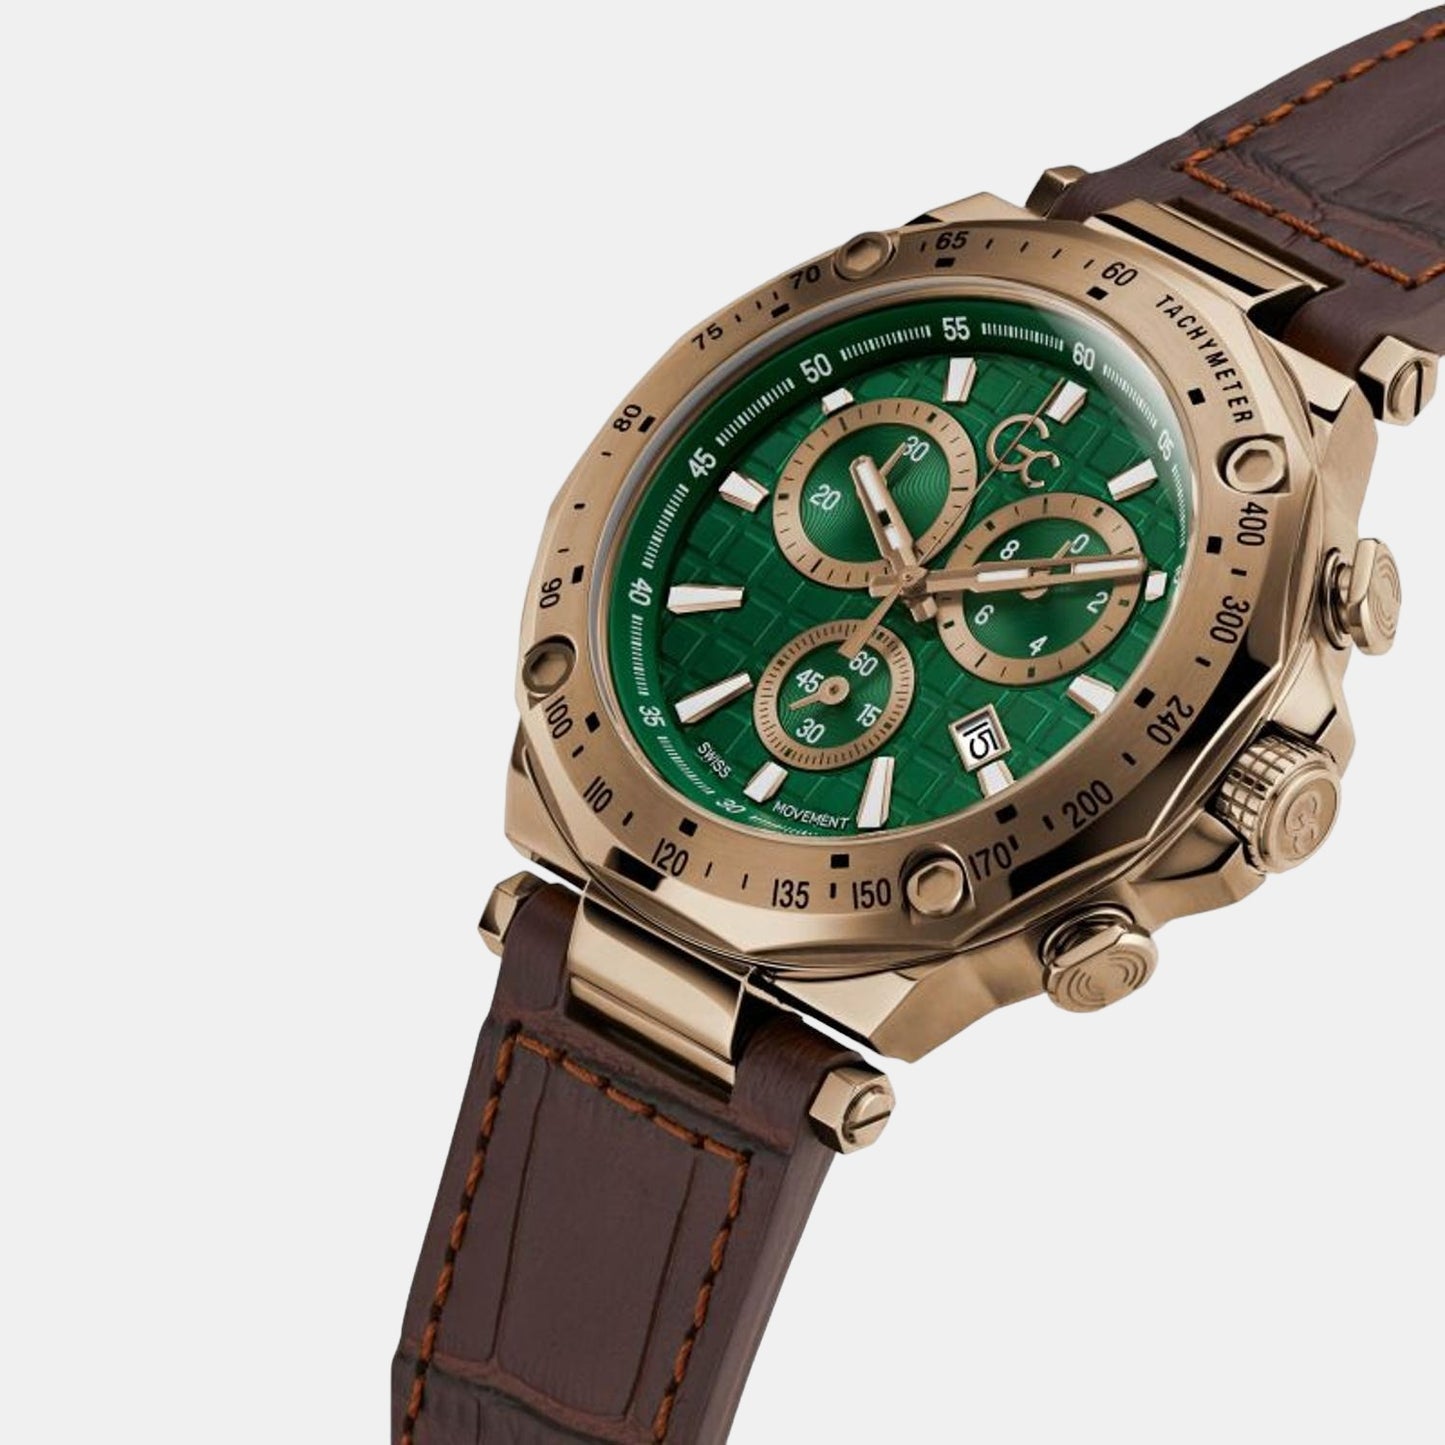 Male Green Leather Chronograph Watch Y81009G9MF